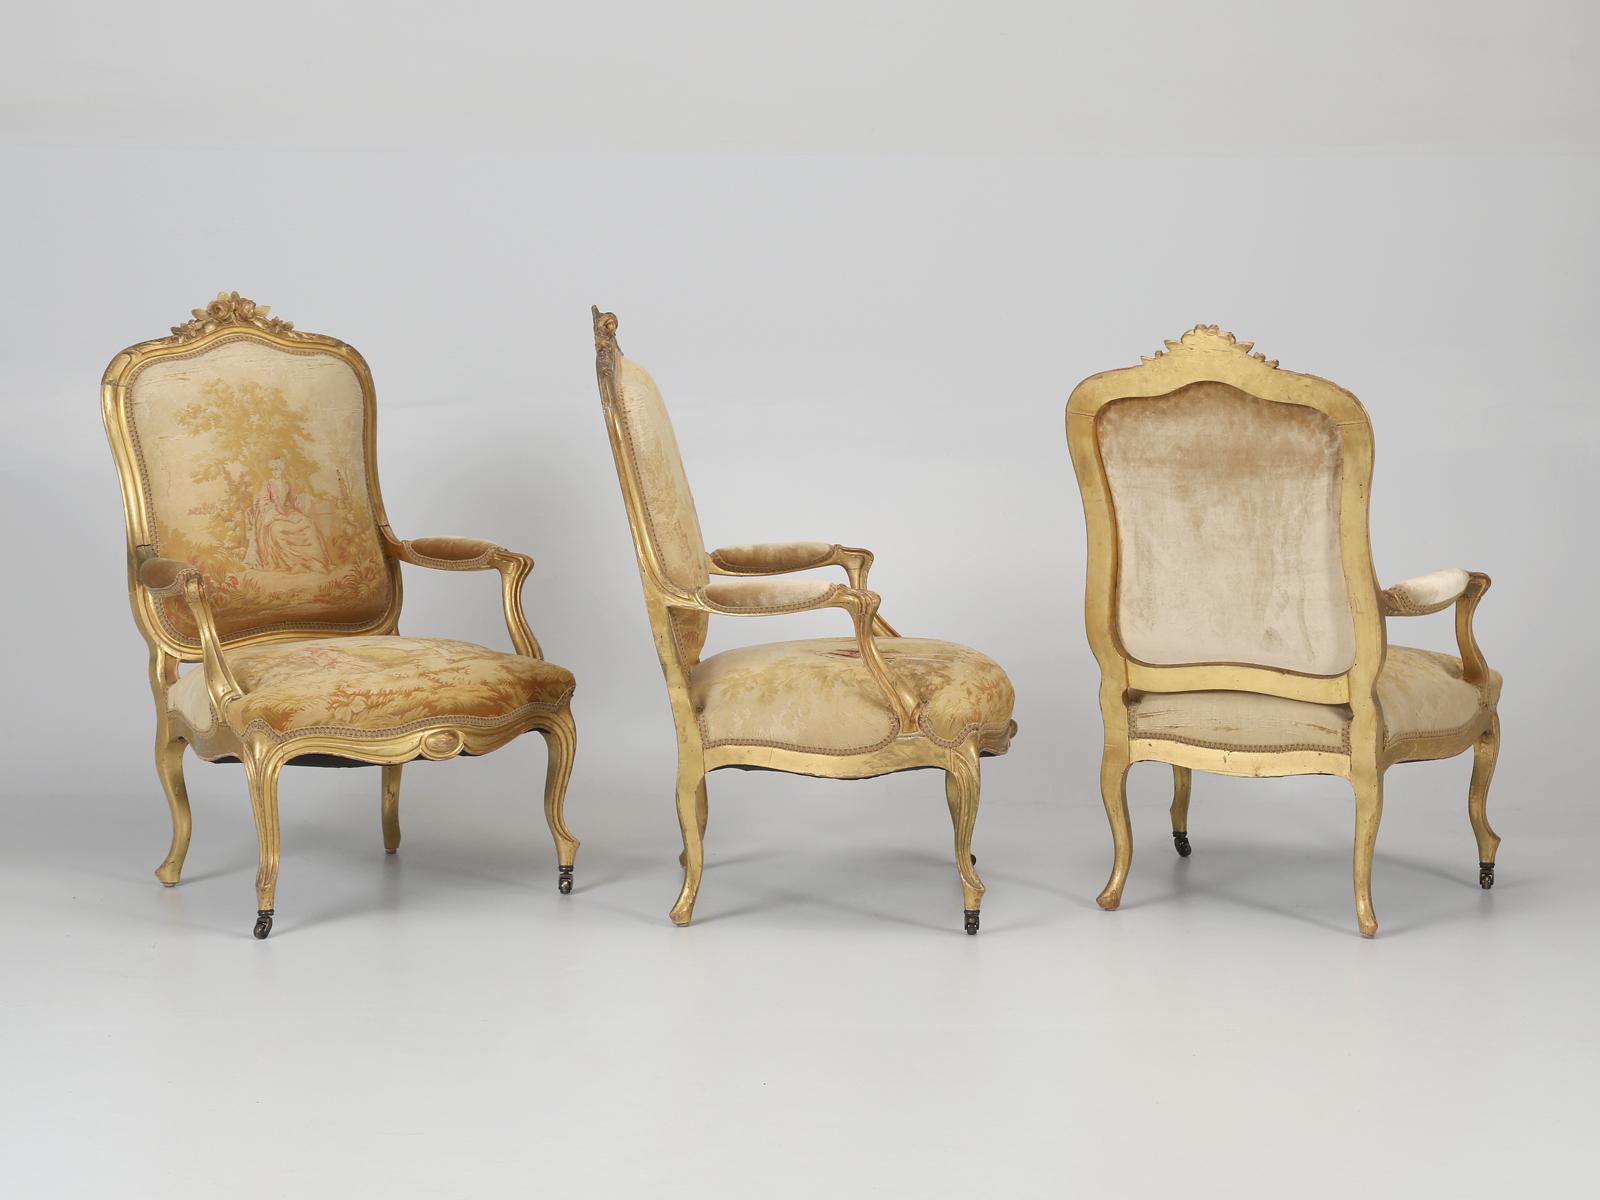 Antique French Louis XV Style Arm Chairs in Original Fabric and Gilt Frames For Sale 15